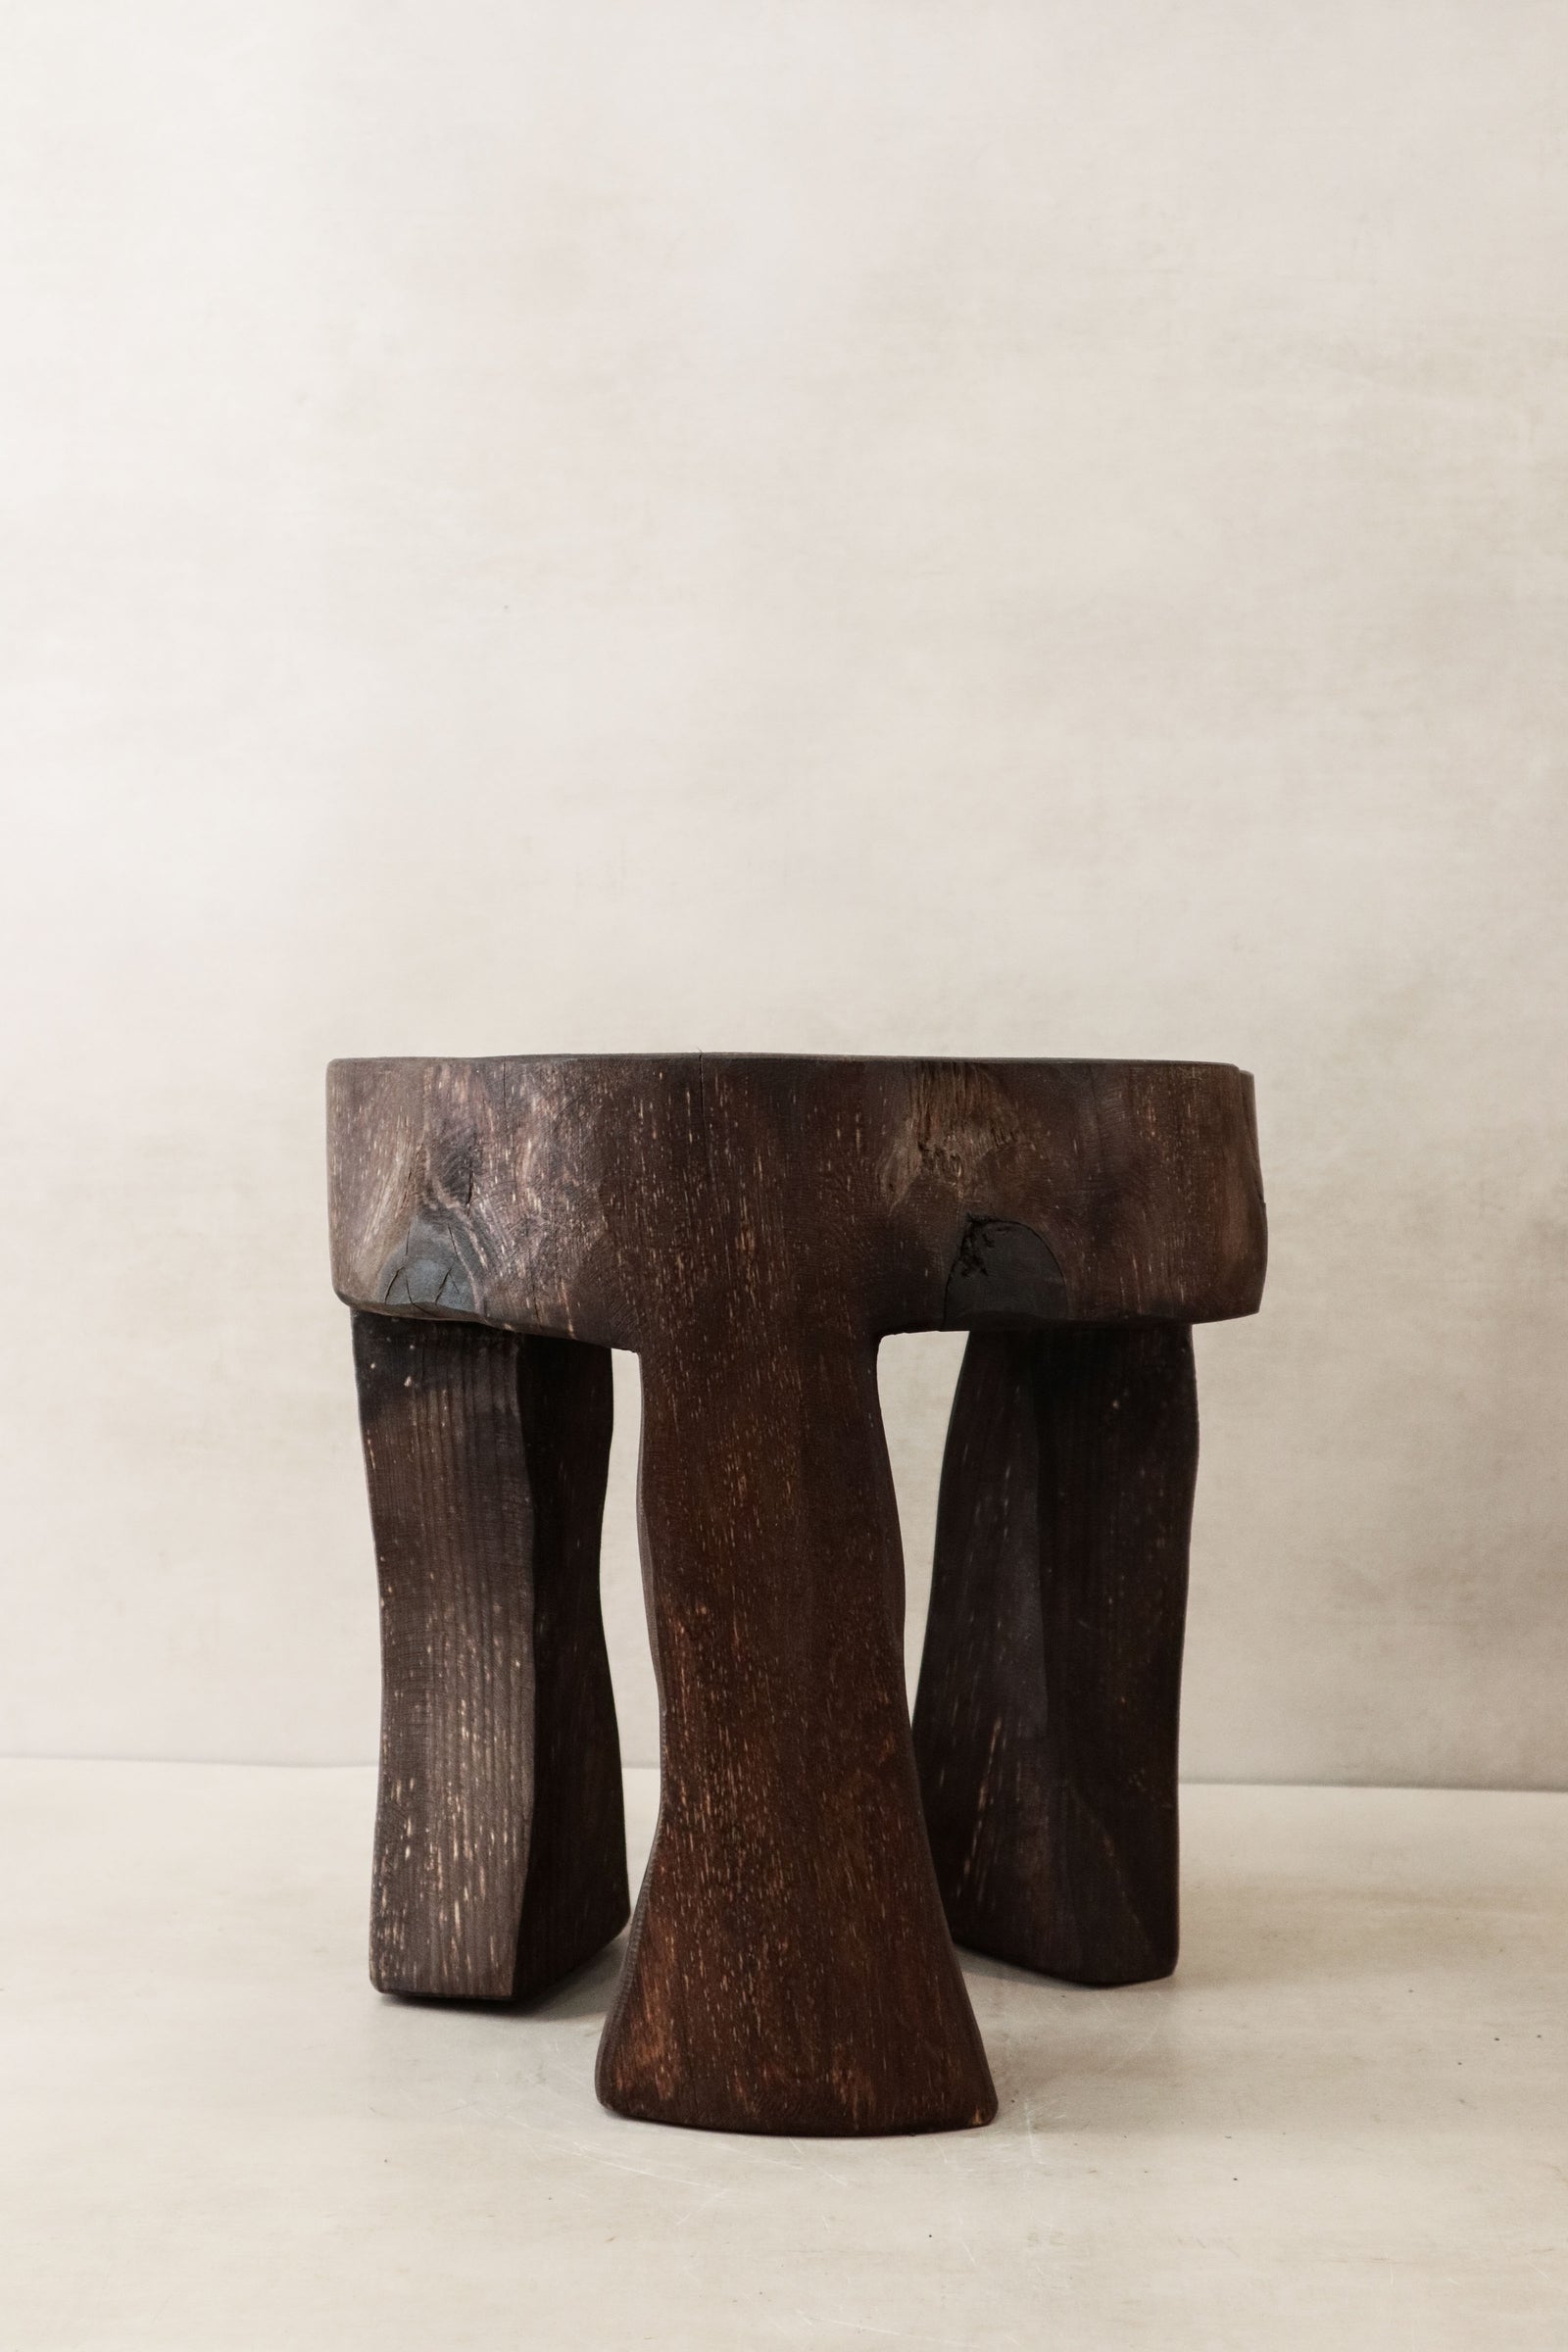 Hand Carved Wooden Stool\Side Table - 47.1